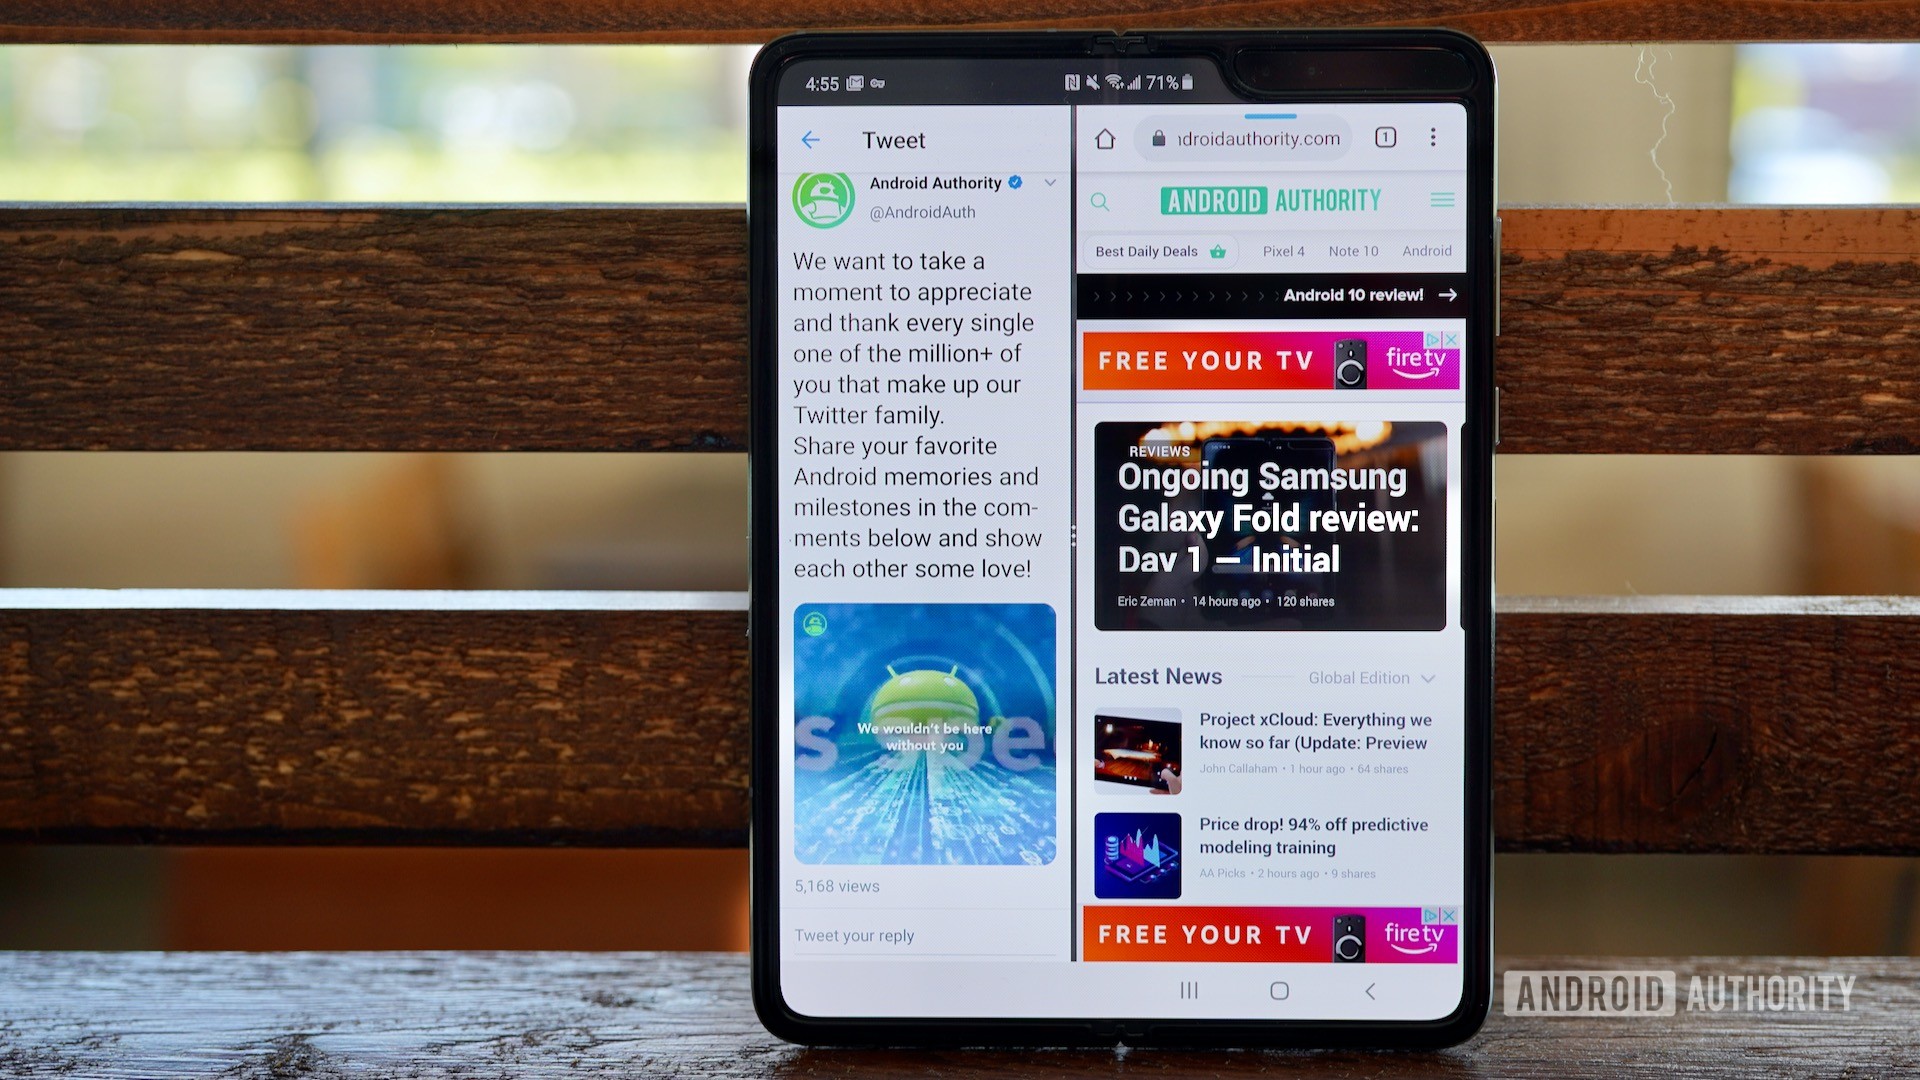 Samsung Galaxy Fold Review multitasking with two apps